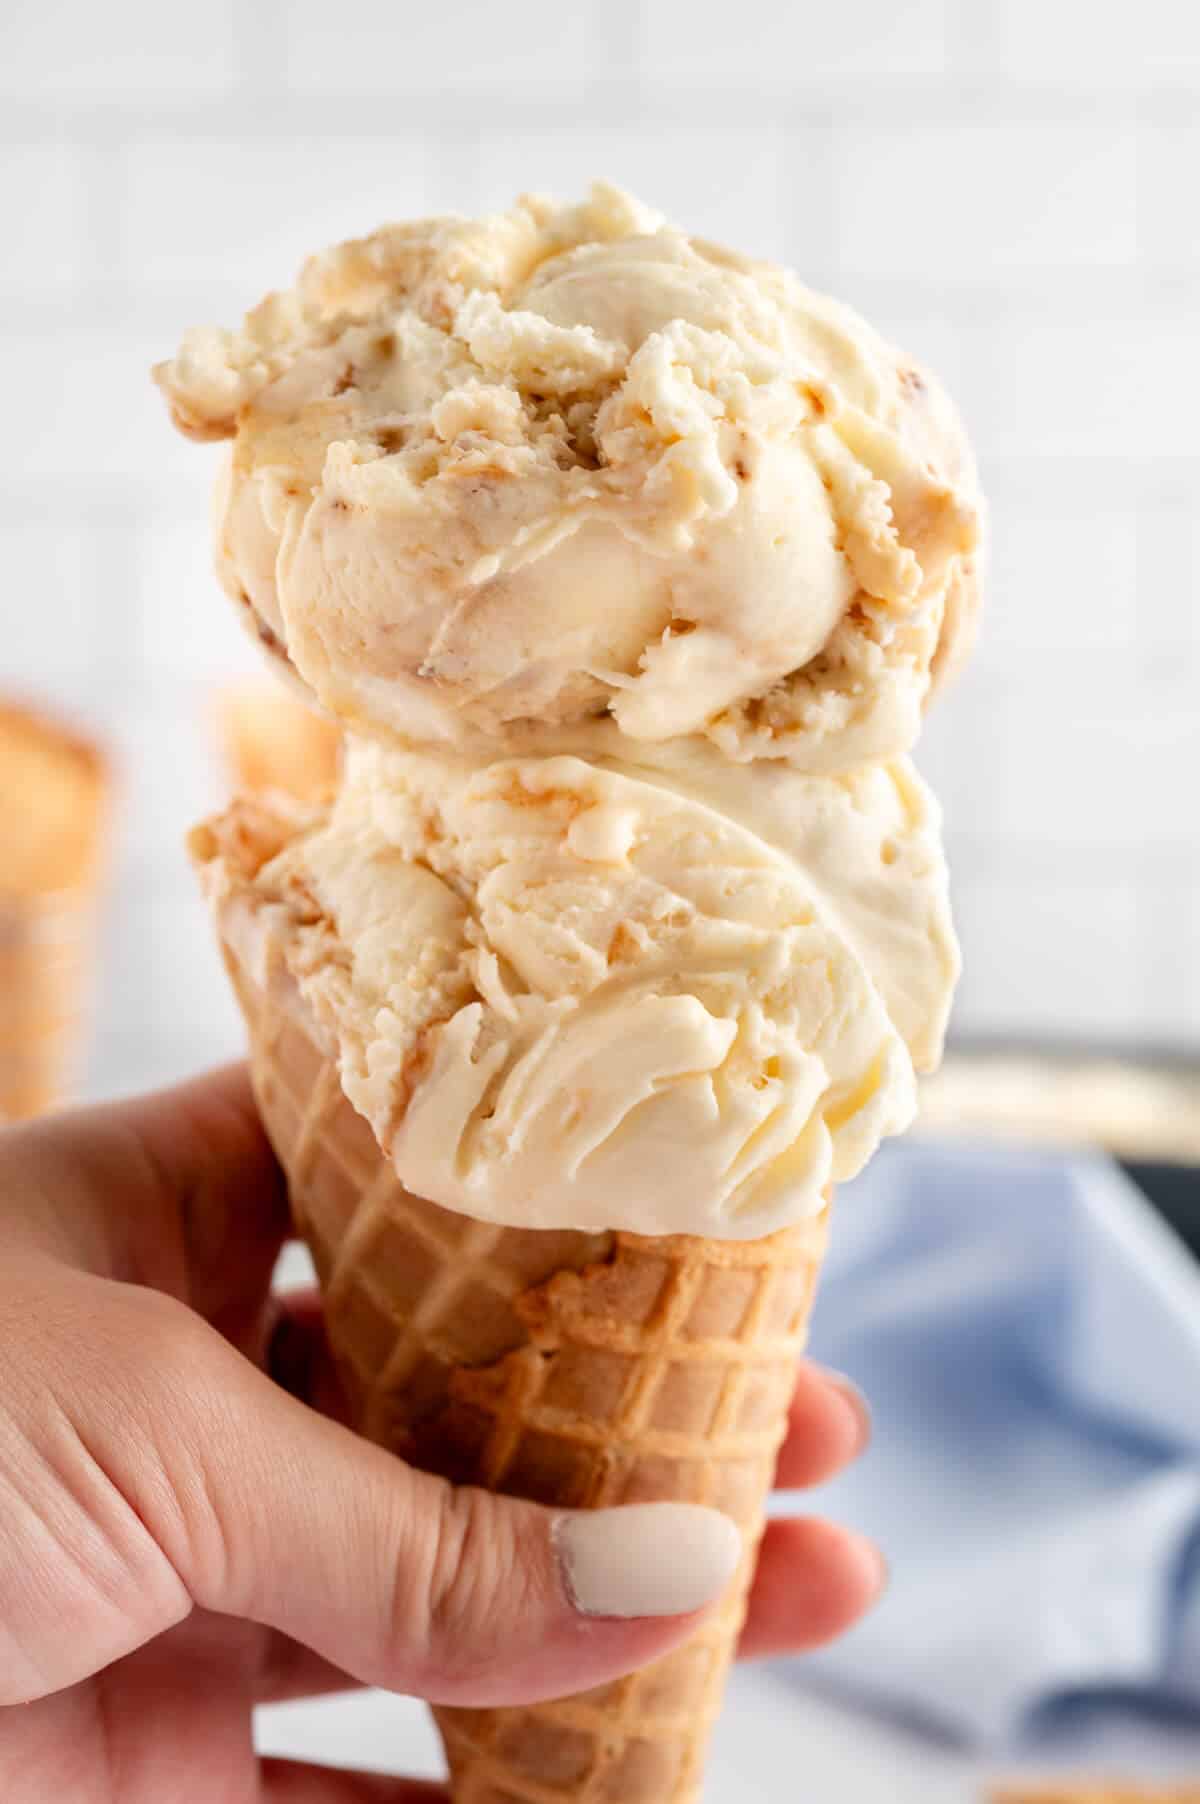 A hand holding a toasted marshmallow ice cream cone.